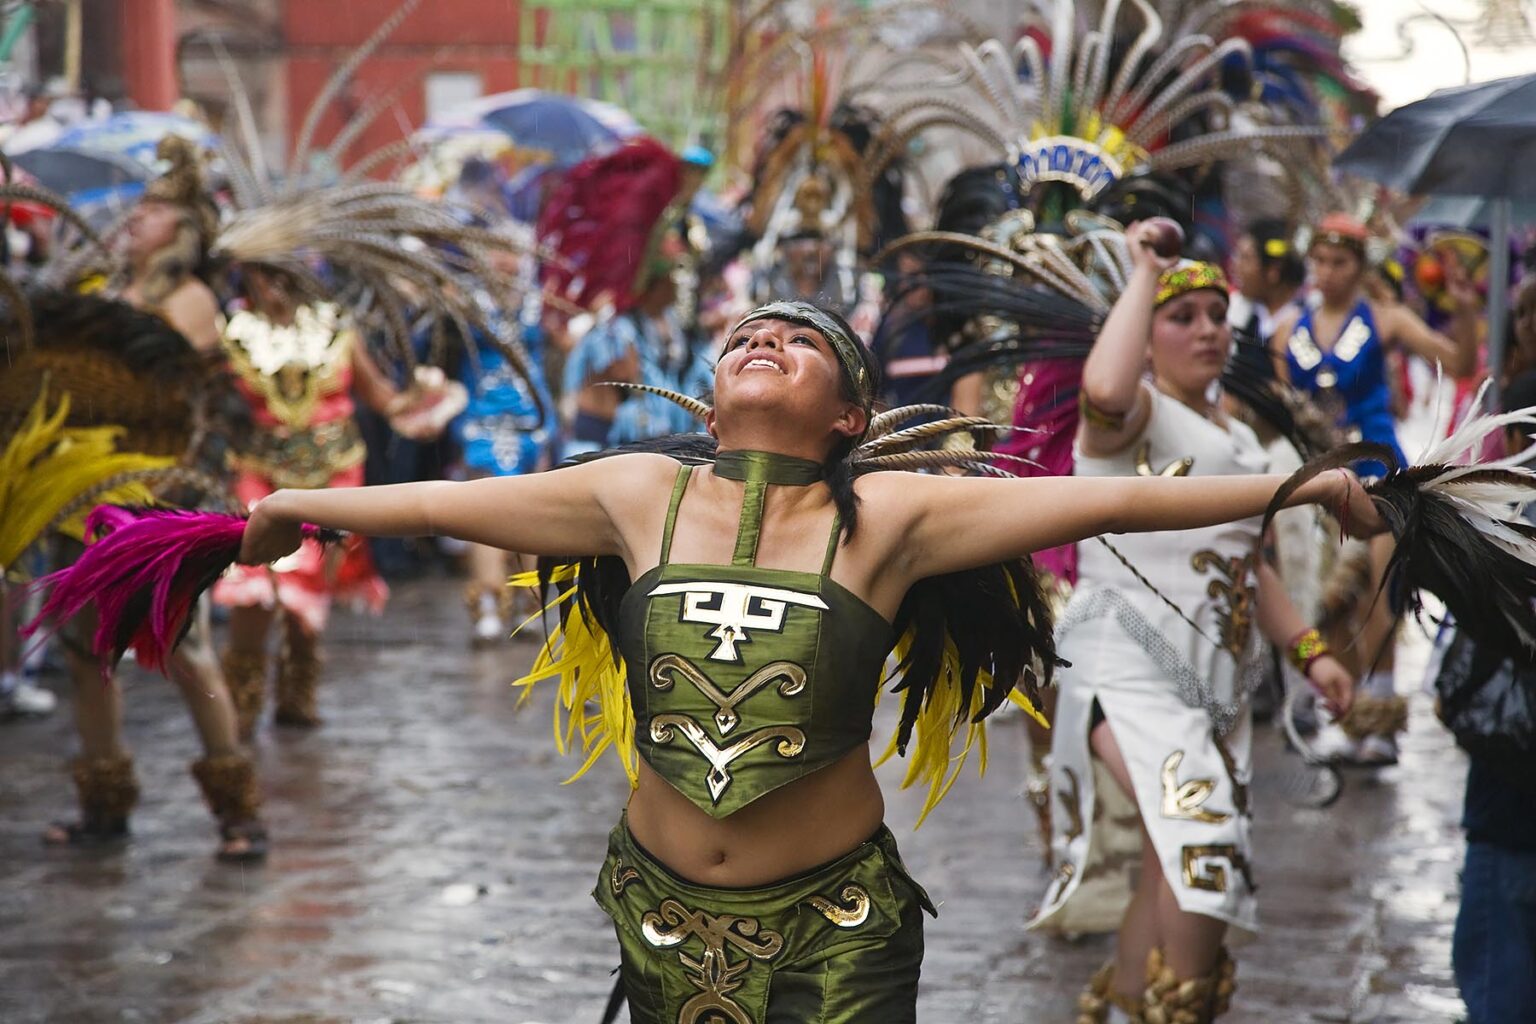 MEXICAN women dance in AZTEC INDIAN COSTUMES & FEATHERED HEADDRESSES in the FESTIVAL DE SAN MIGUEL ARCHANGEL PARADE - SAN MIGUEL DE ALLENDE, MEXICO